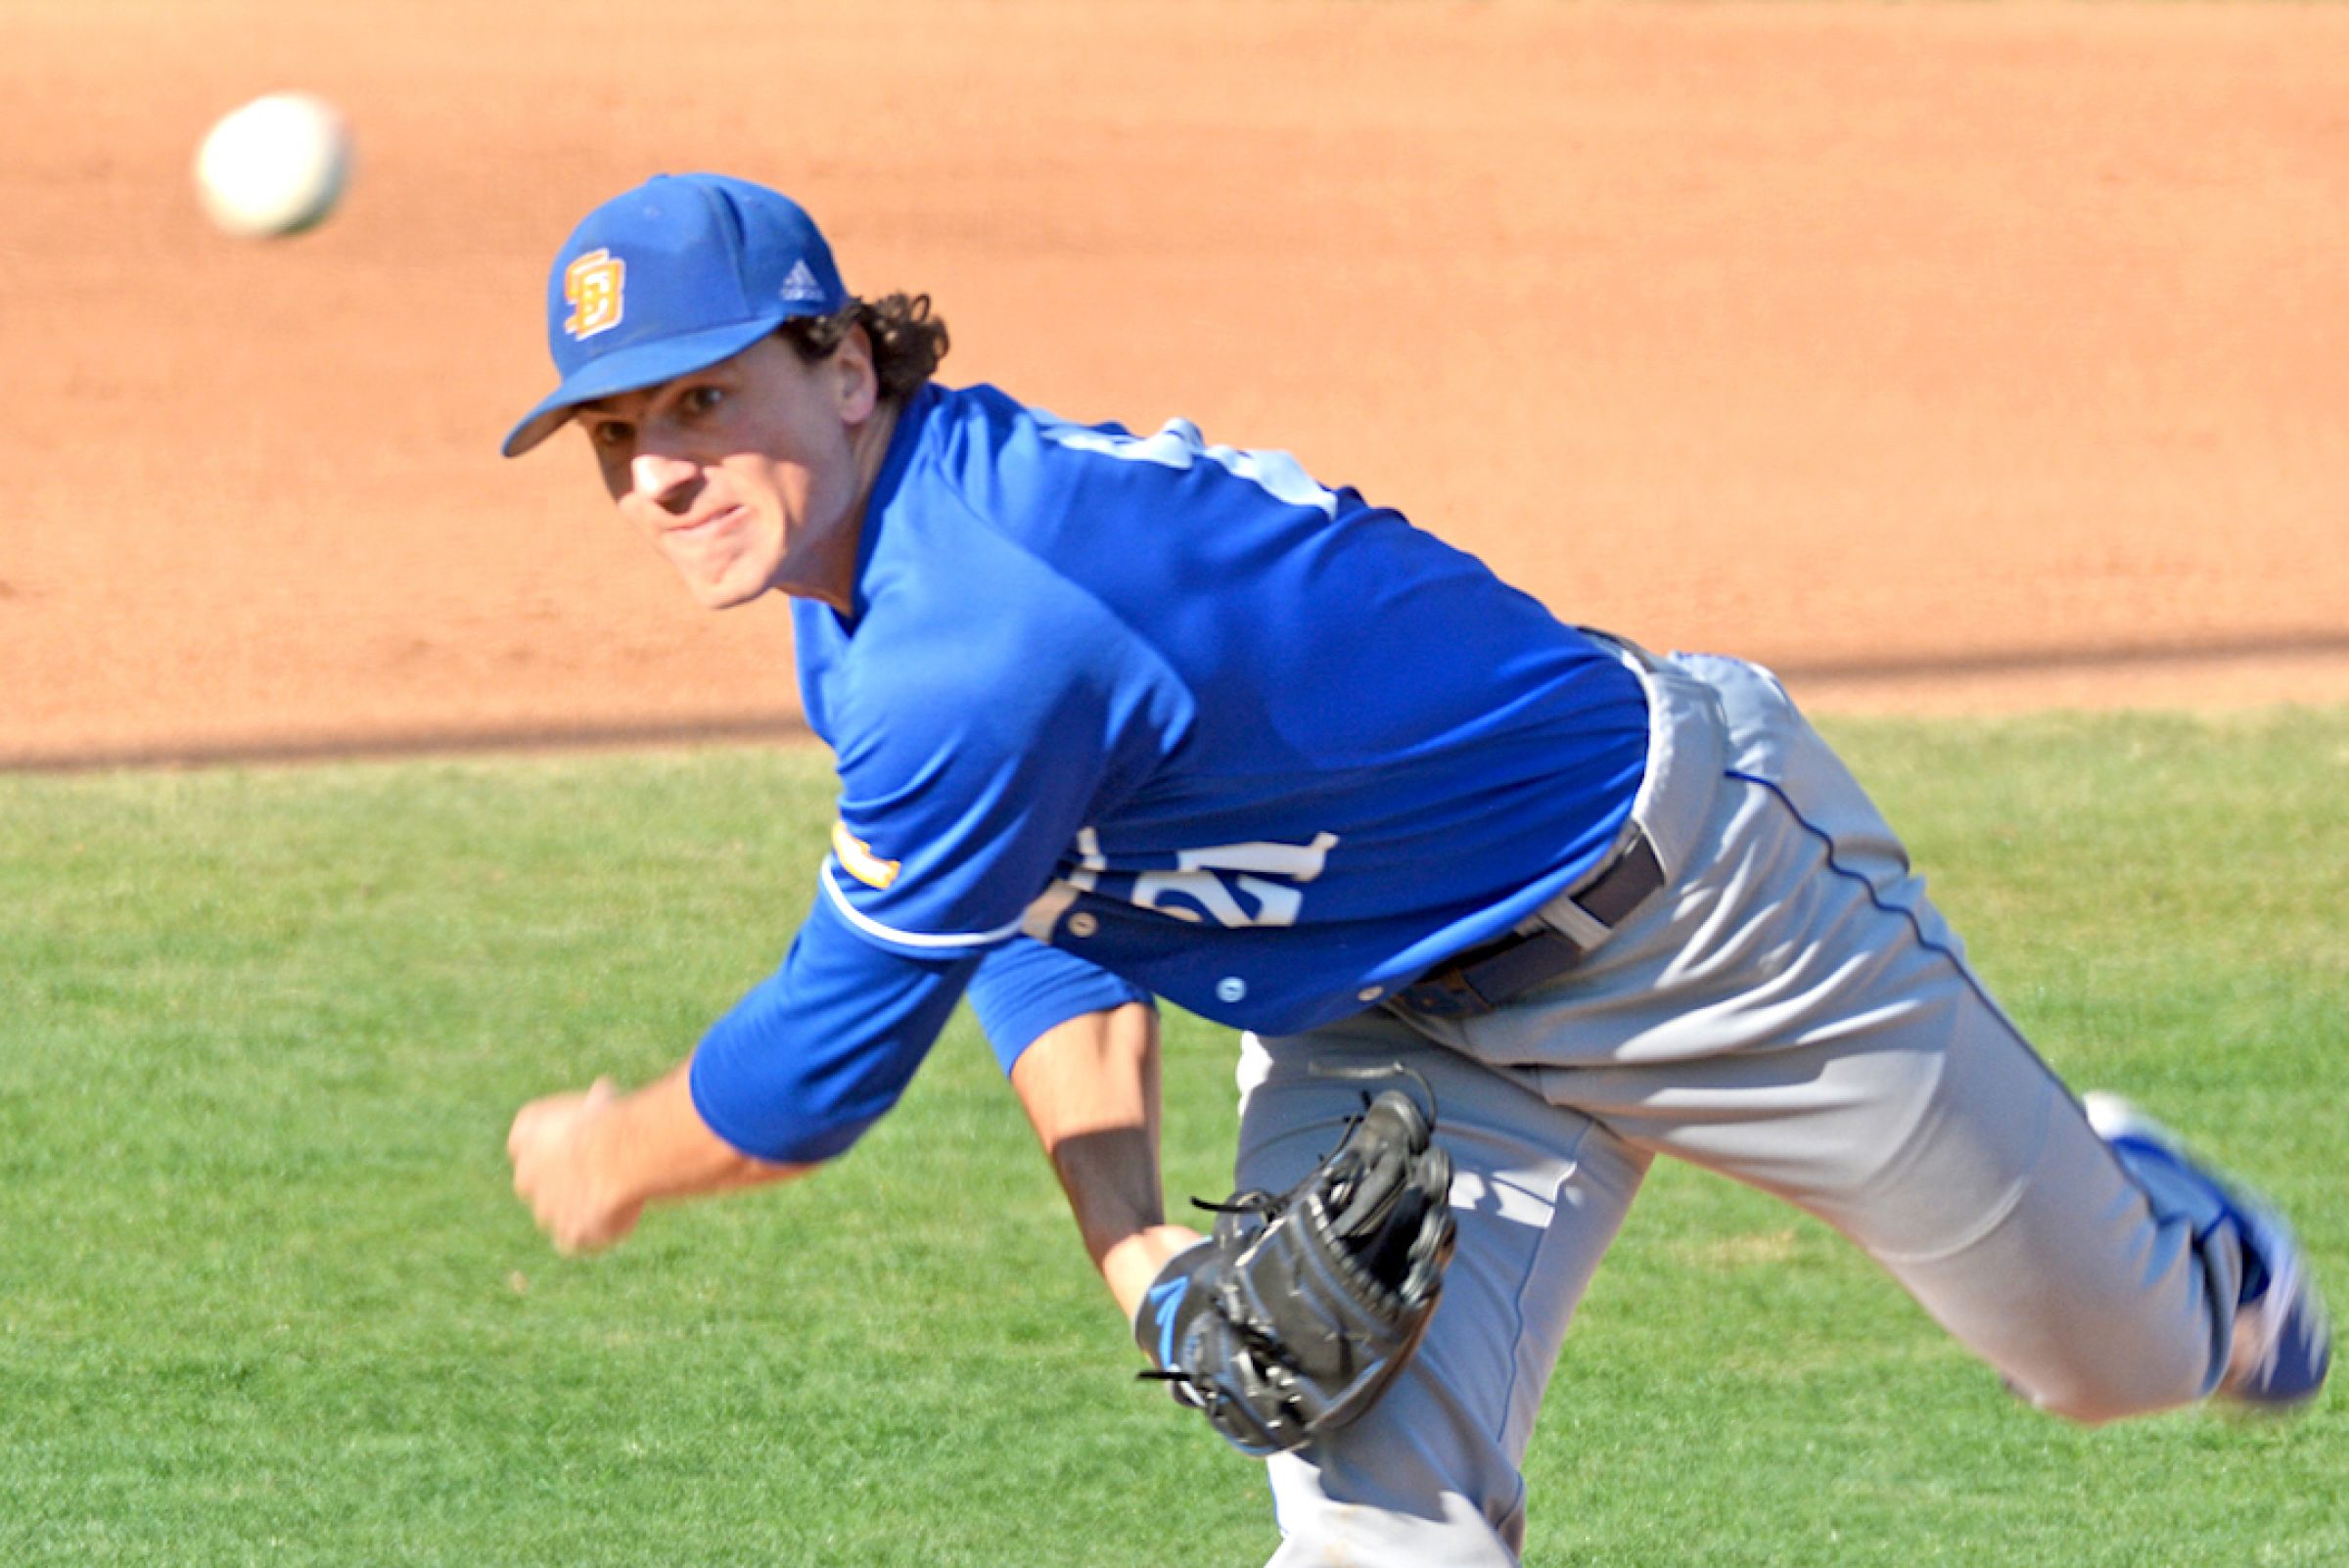 UCSB pitcher Zach Torra named to All-American team